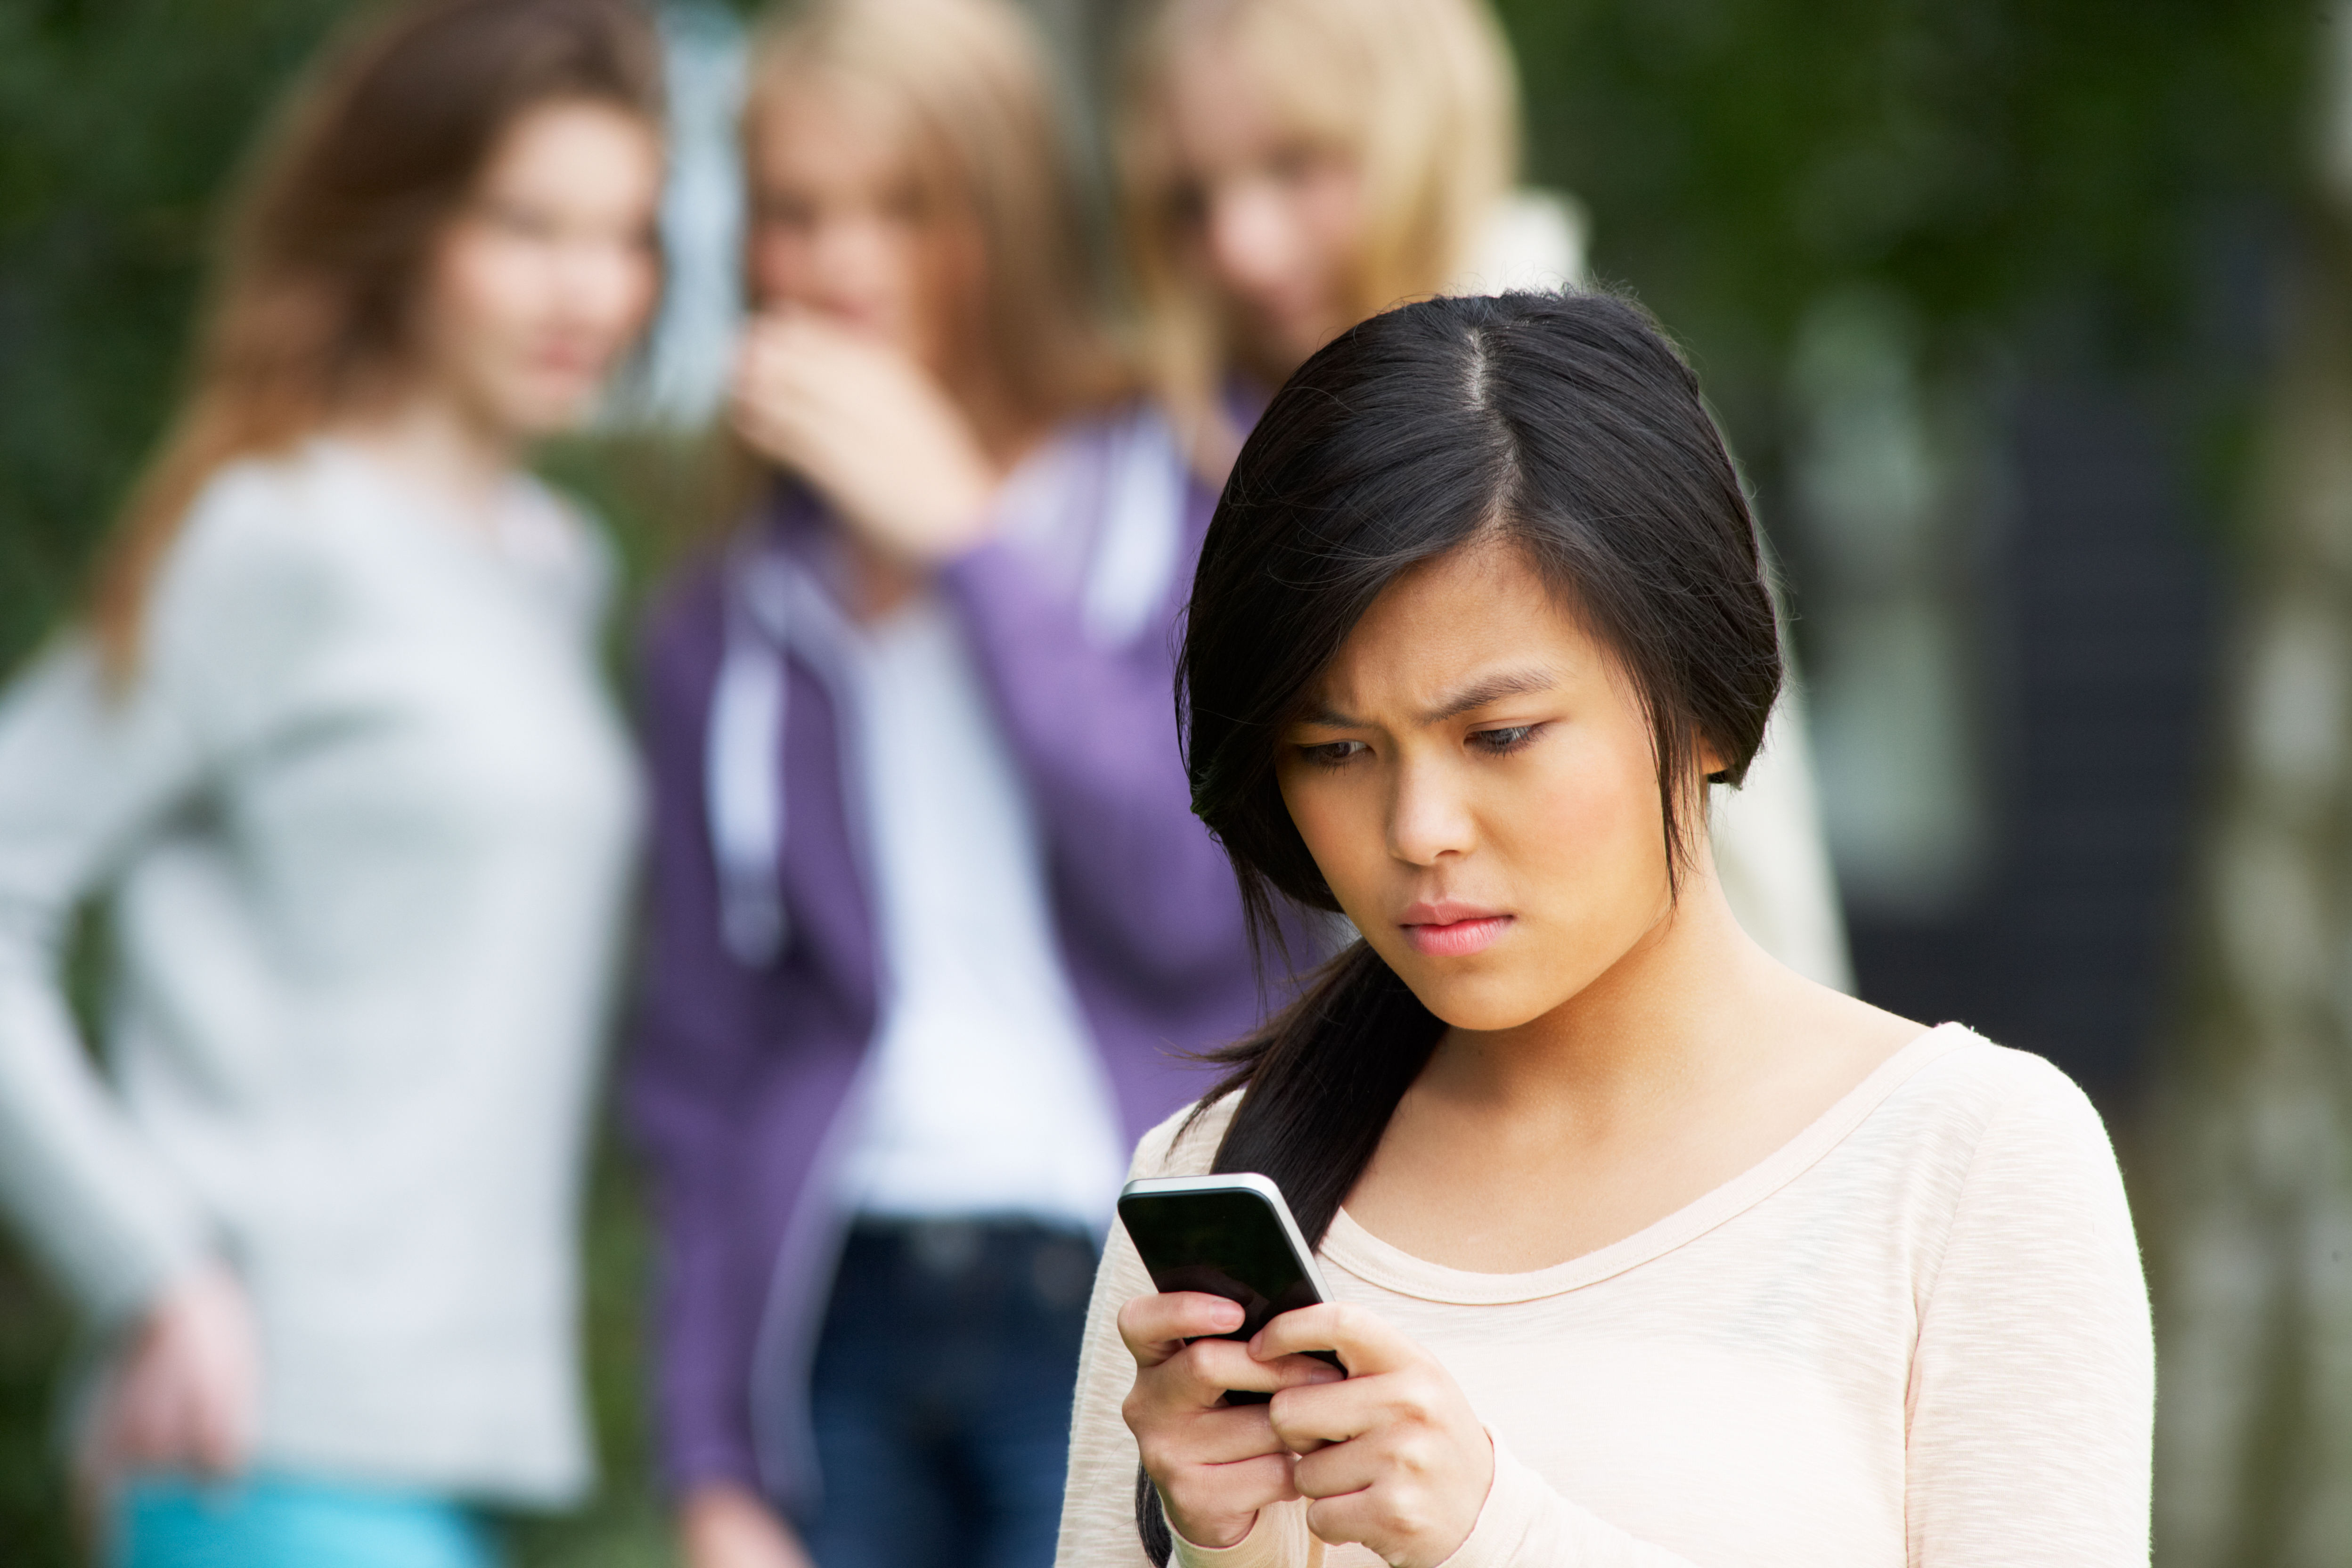 Stock image of concerned girl reading mobile device. 